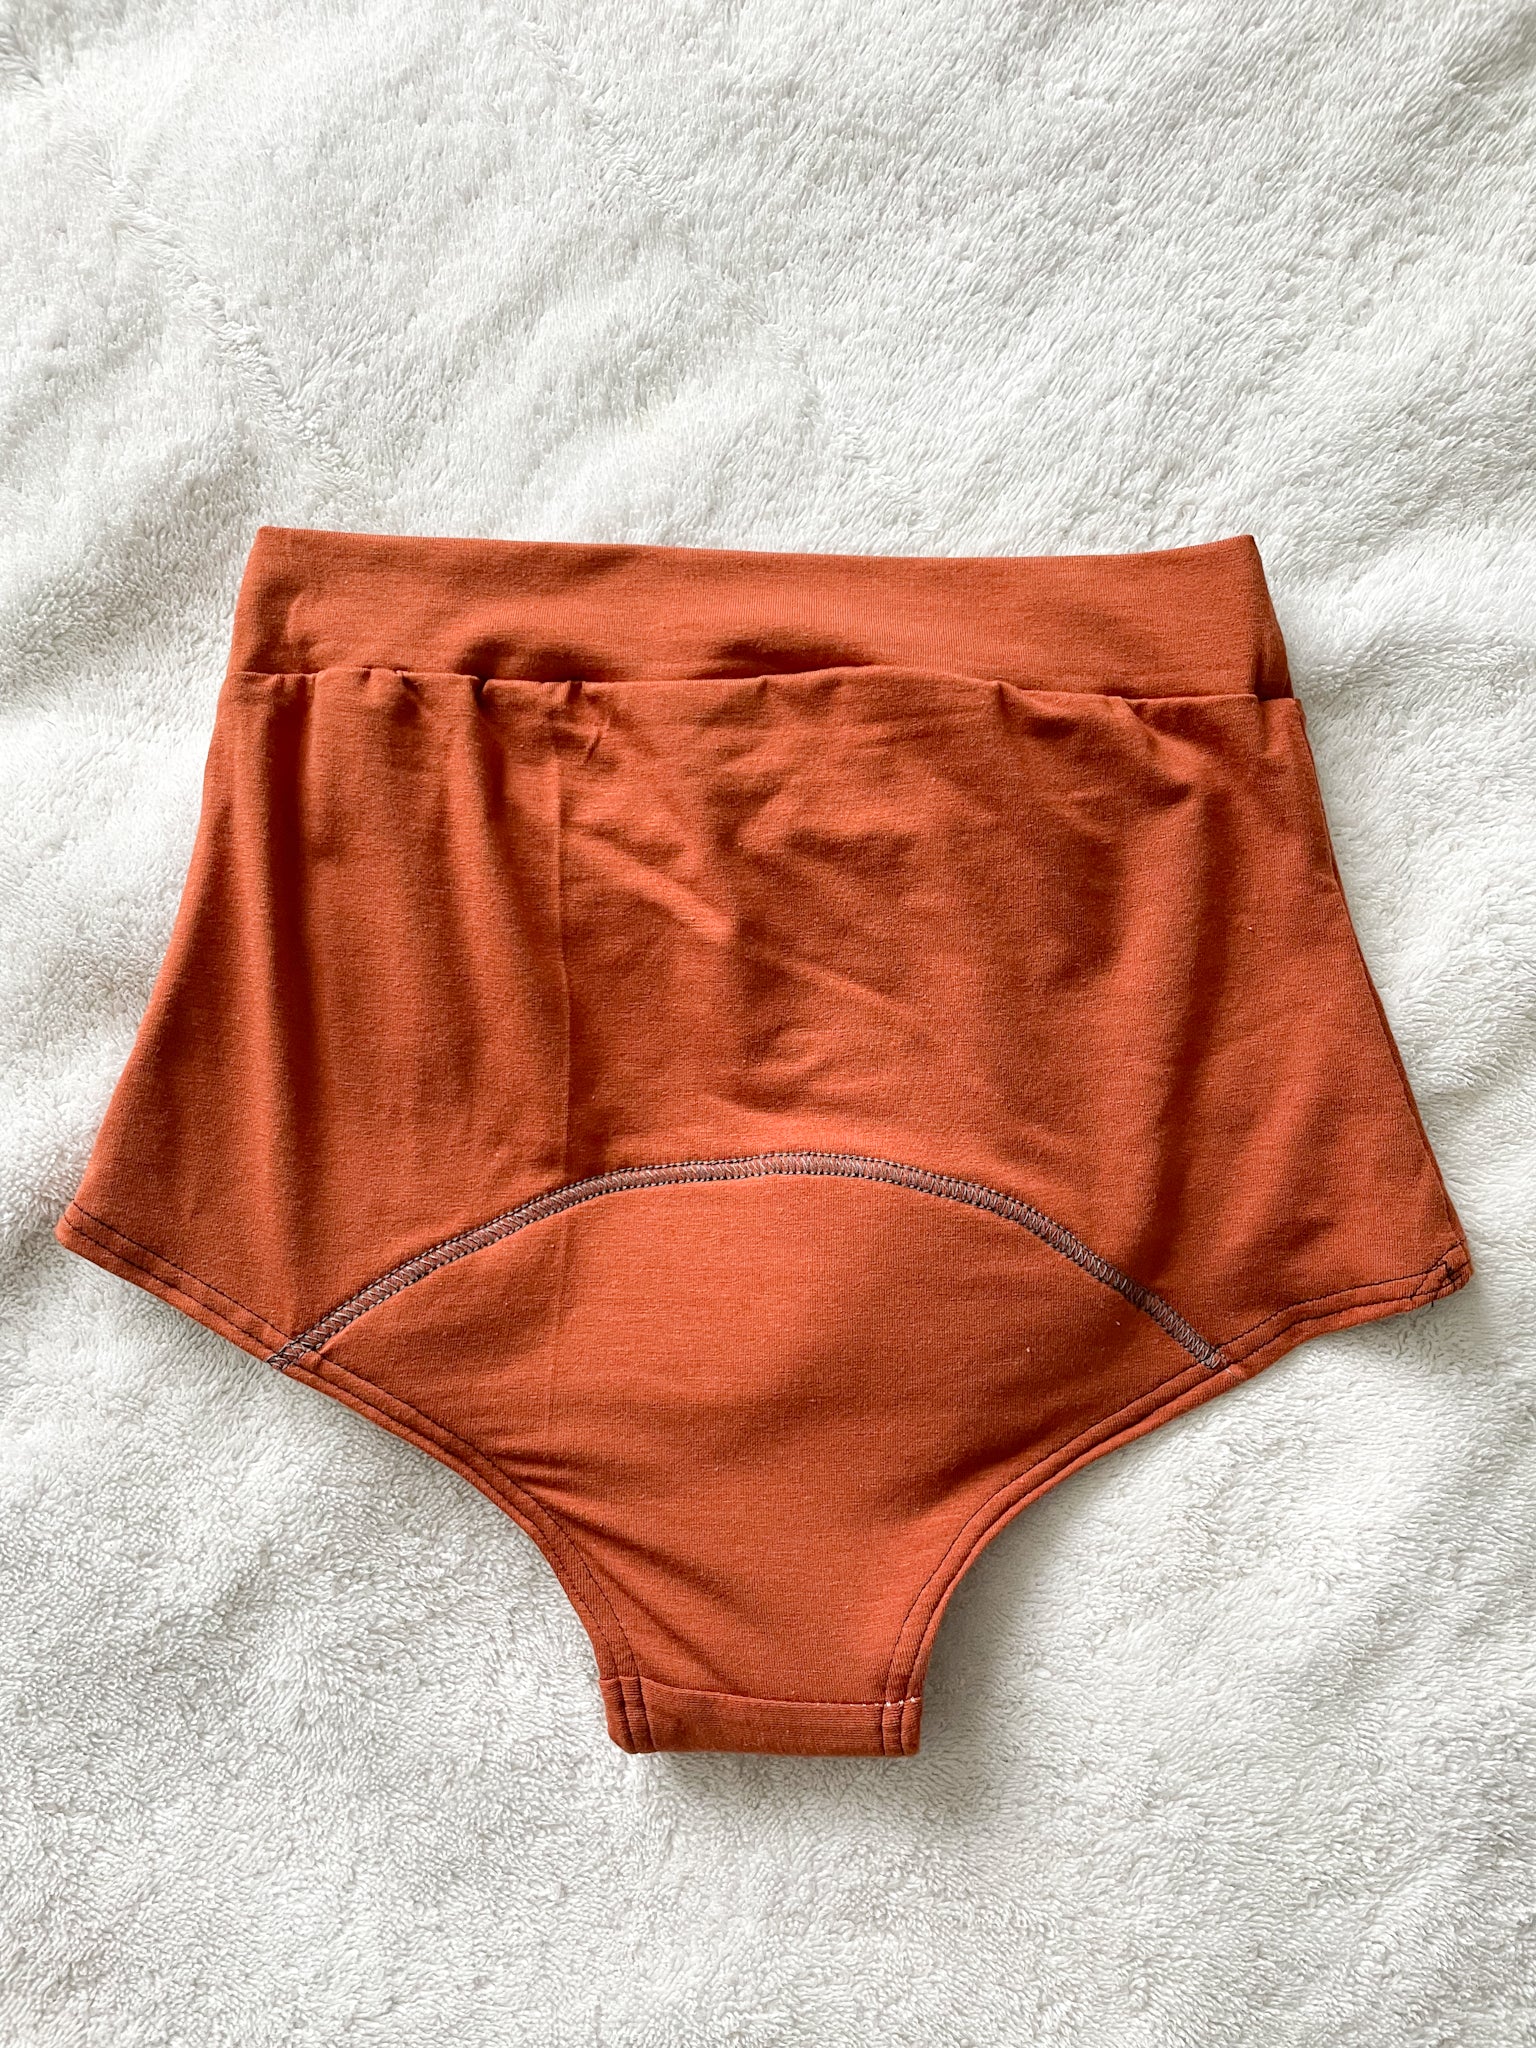 Leopard period underwear – The Bamboo House